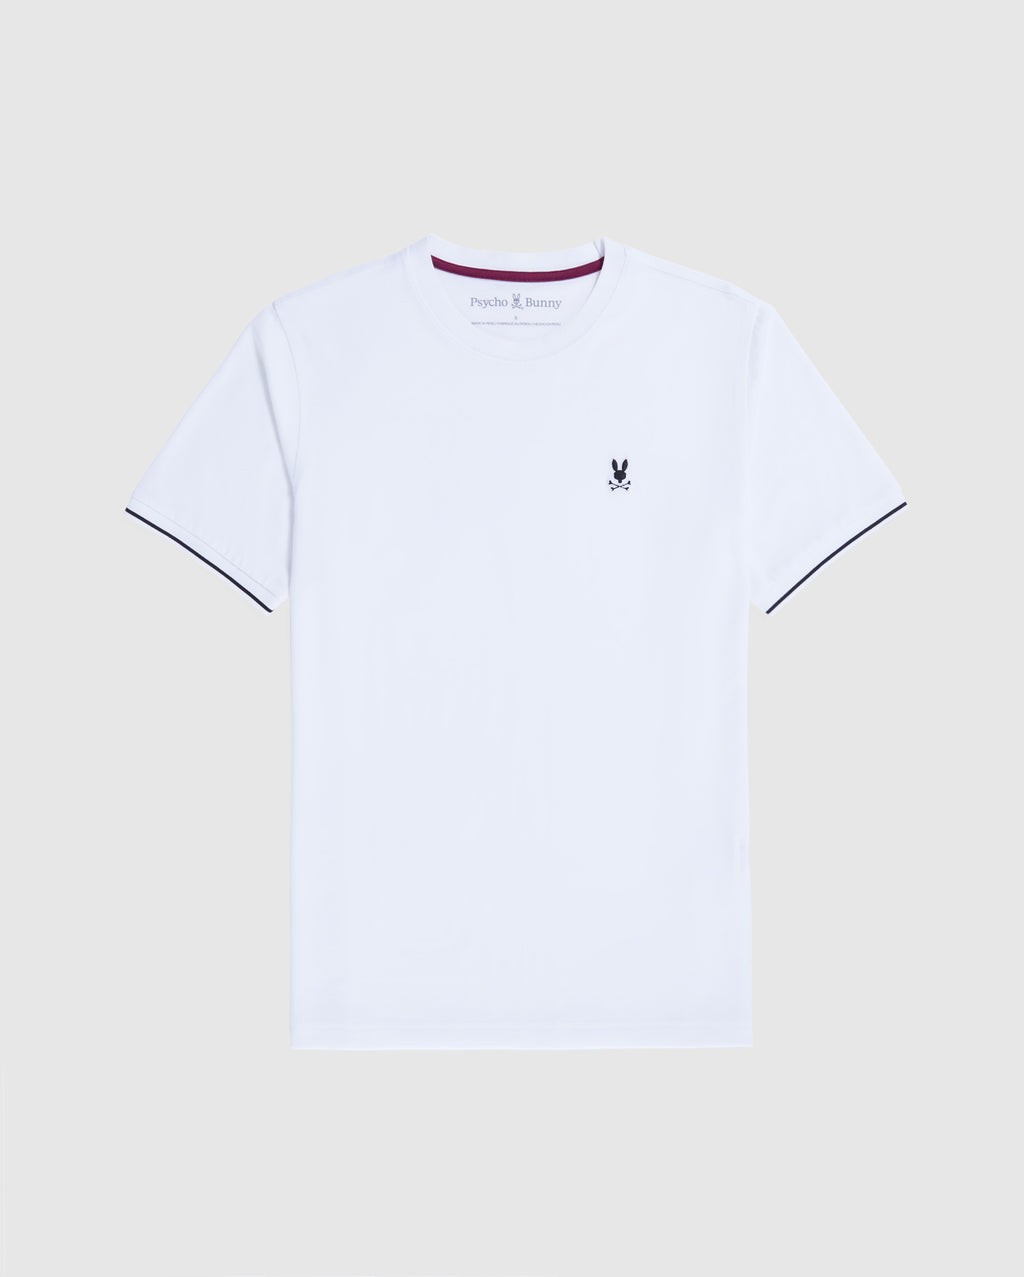 Psycho Bunny Lambert Relaxed Fit Heavyweight Logo Graphic T-Shirt in White